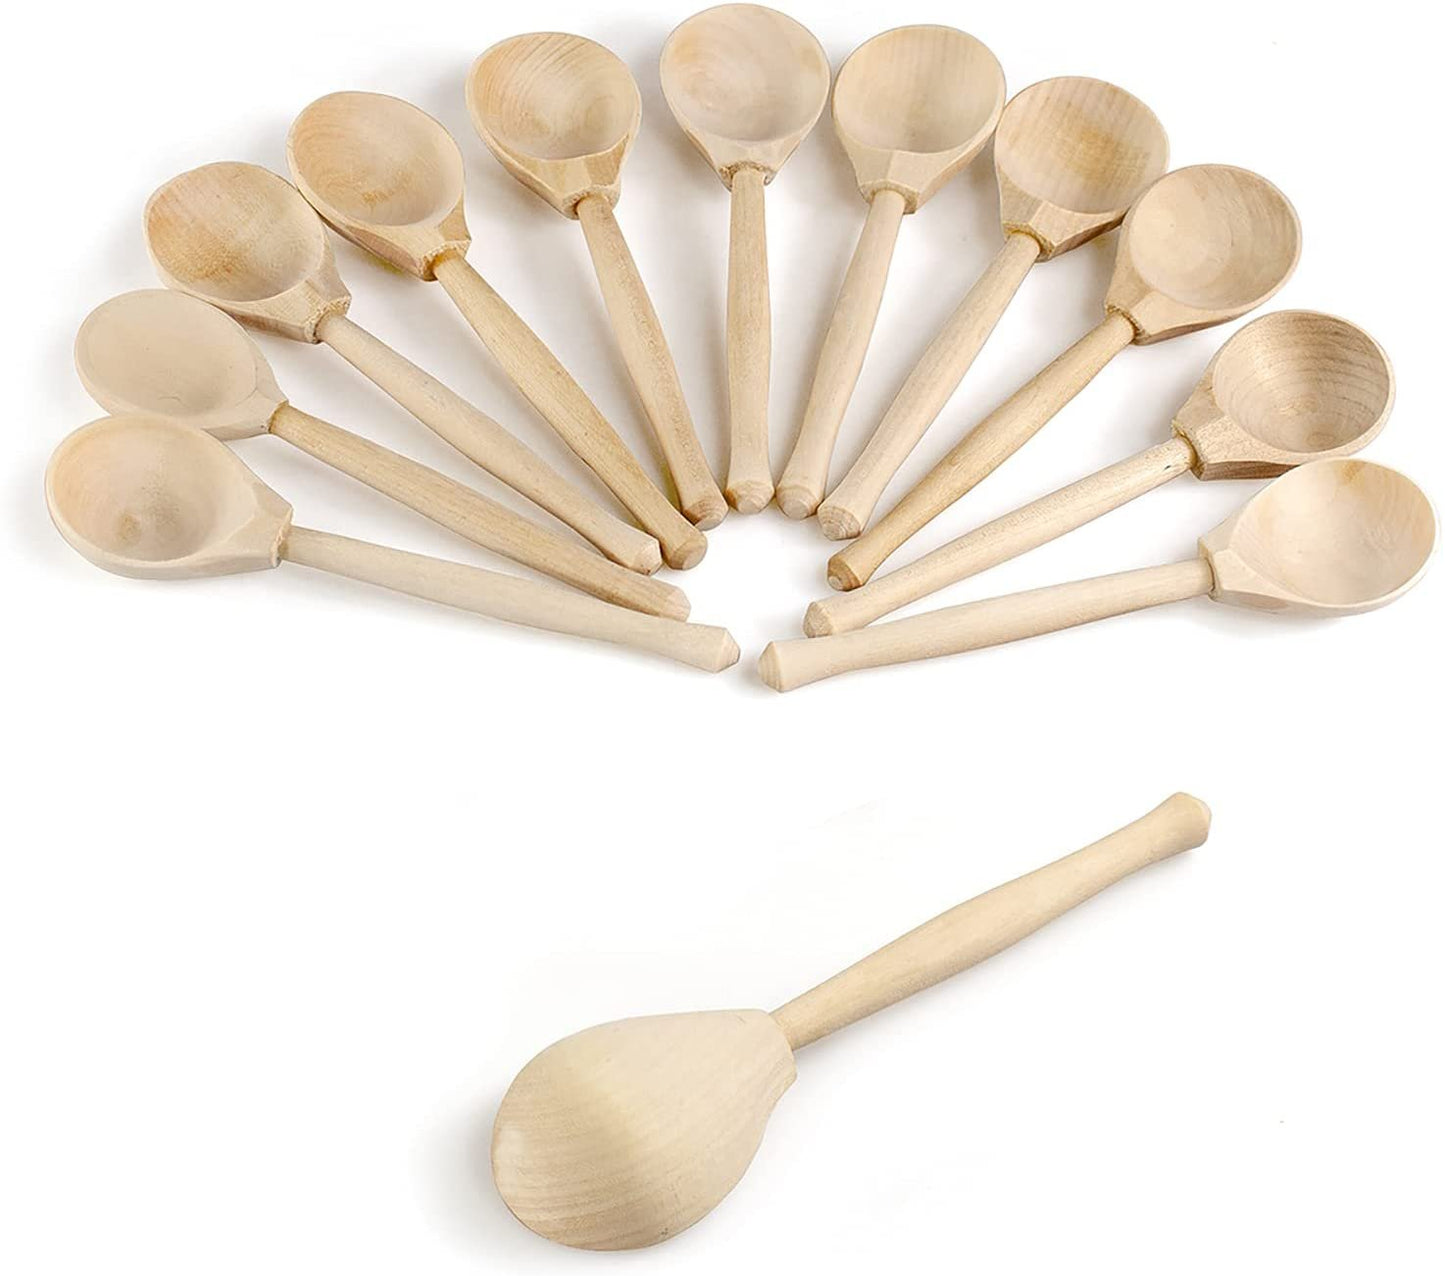 Ulanik DIY 12 pcs Unfinished Wooden Spoons Set Unpainted Figurines for Painting, Pyrography, Decoupage Crafts